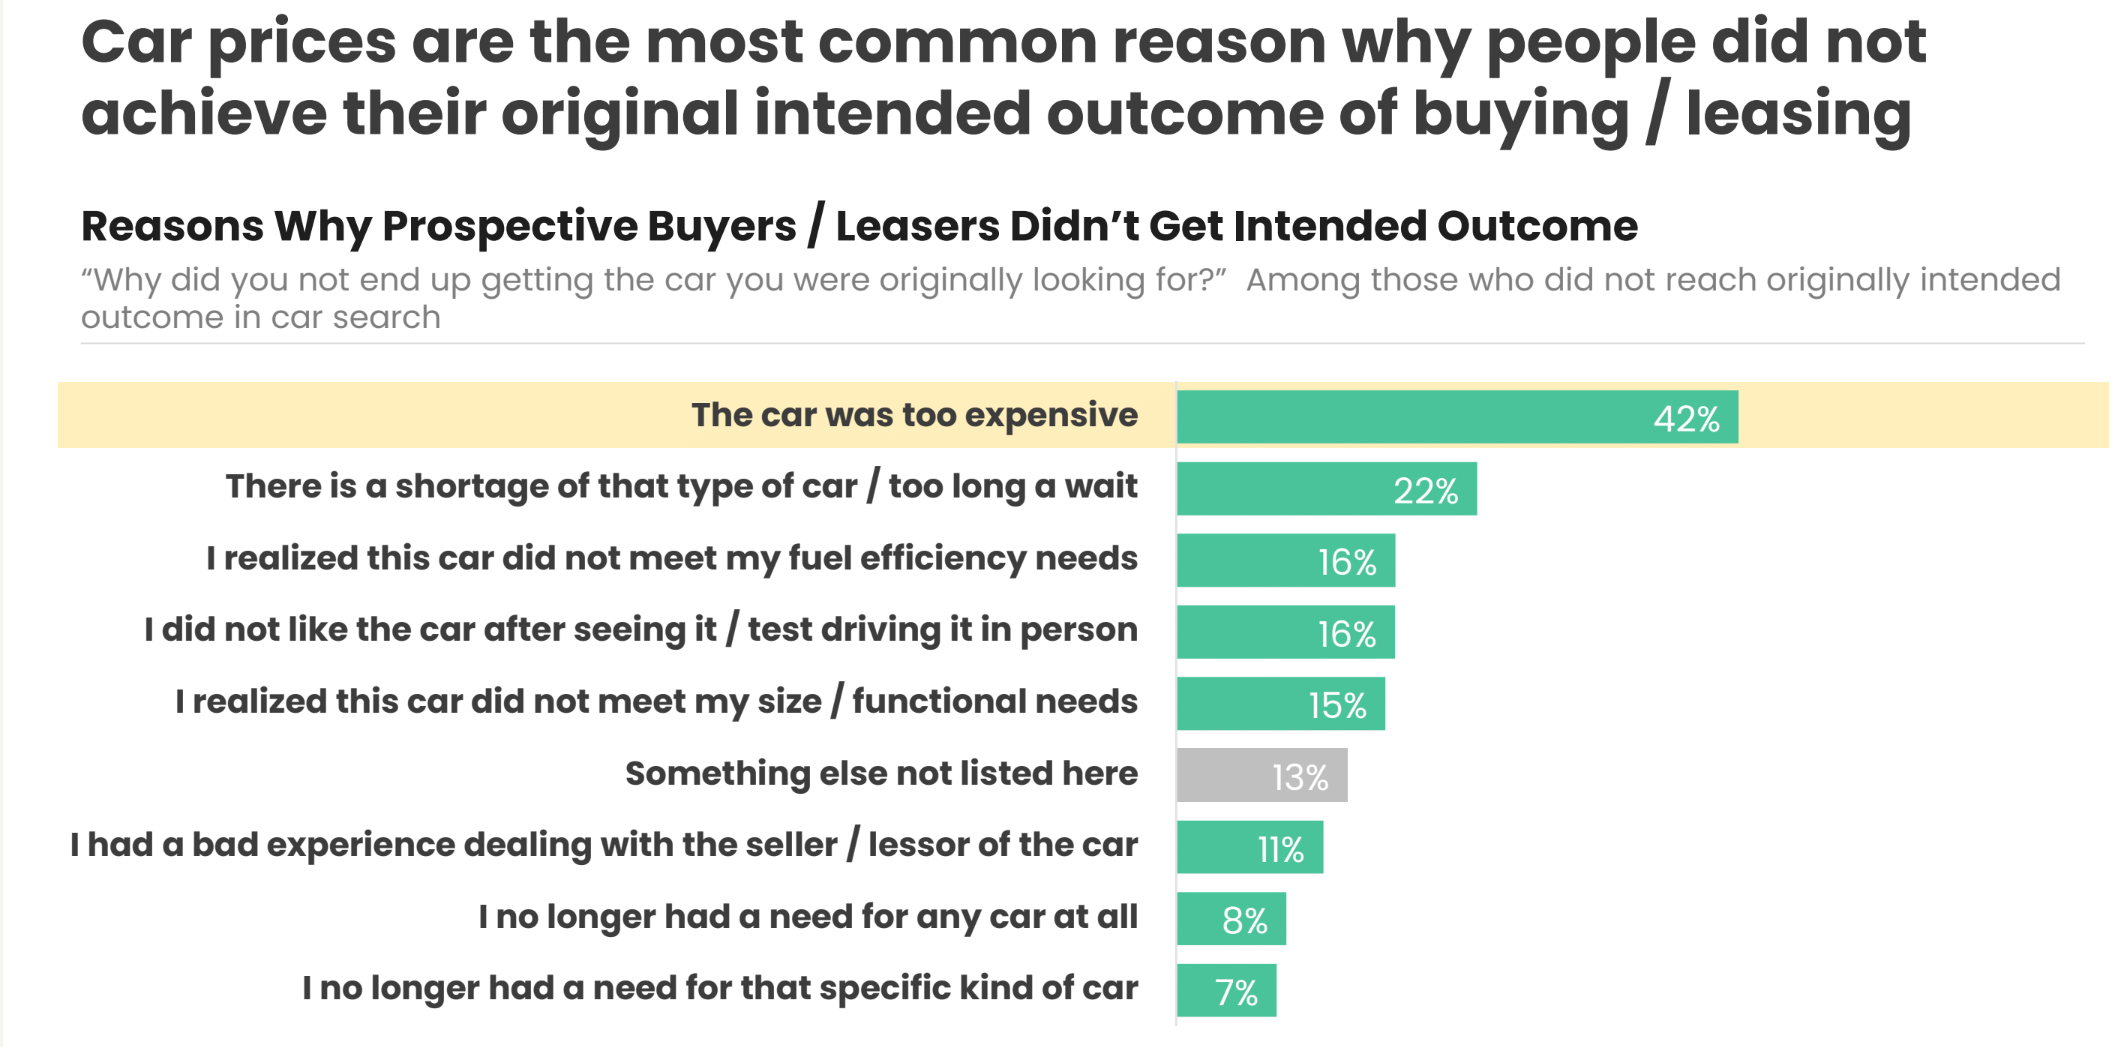 Survey results showing negative impacts for those who did not reach their intended outcome in the auto market are ongoing gas expenses, ability to travel, and self-image or driving enjoyment.